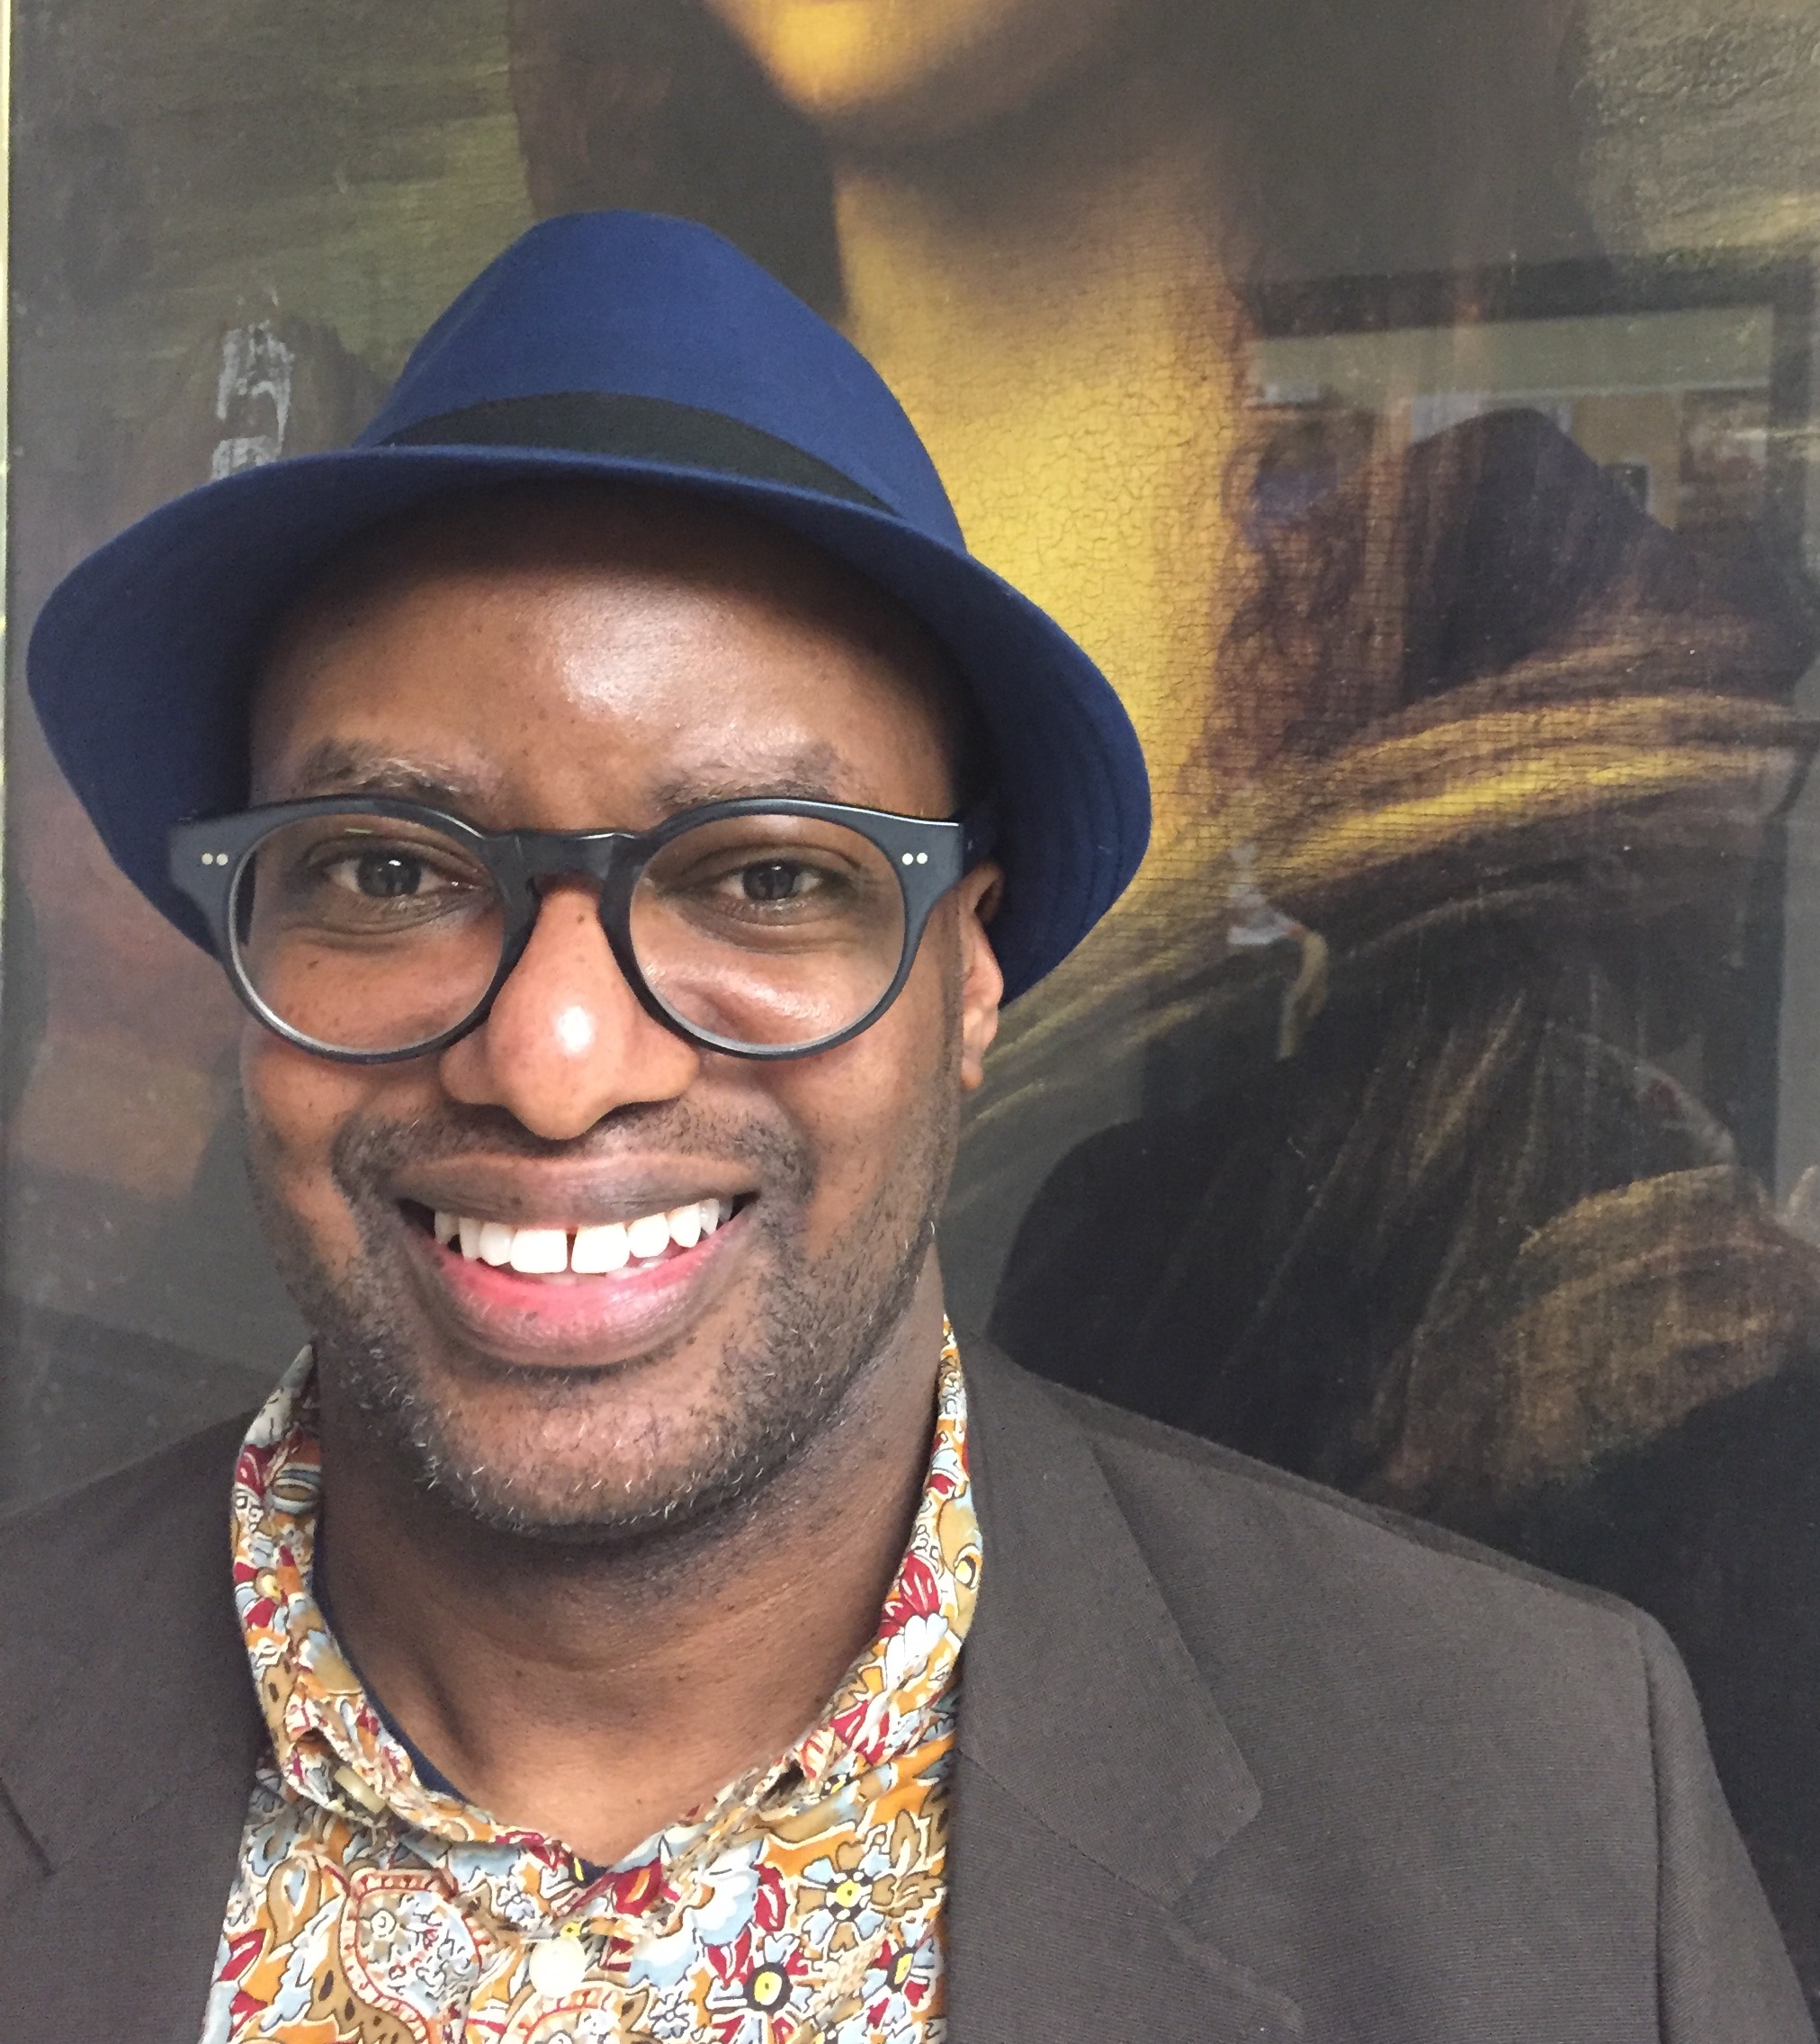 Michael Fraser is seen from mid-chest up, wearing a blue Trilby hat with a dark brown band, a brown suit jacket and a colourfu (mainly orange)l, patterned shirt with a collar. He smiles, looking at the camera in a friendly way through his large, round glasses.